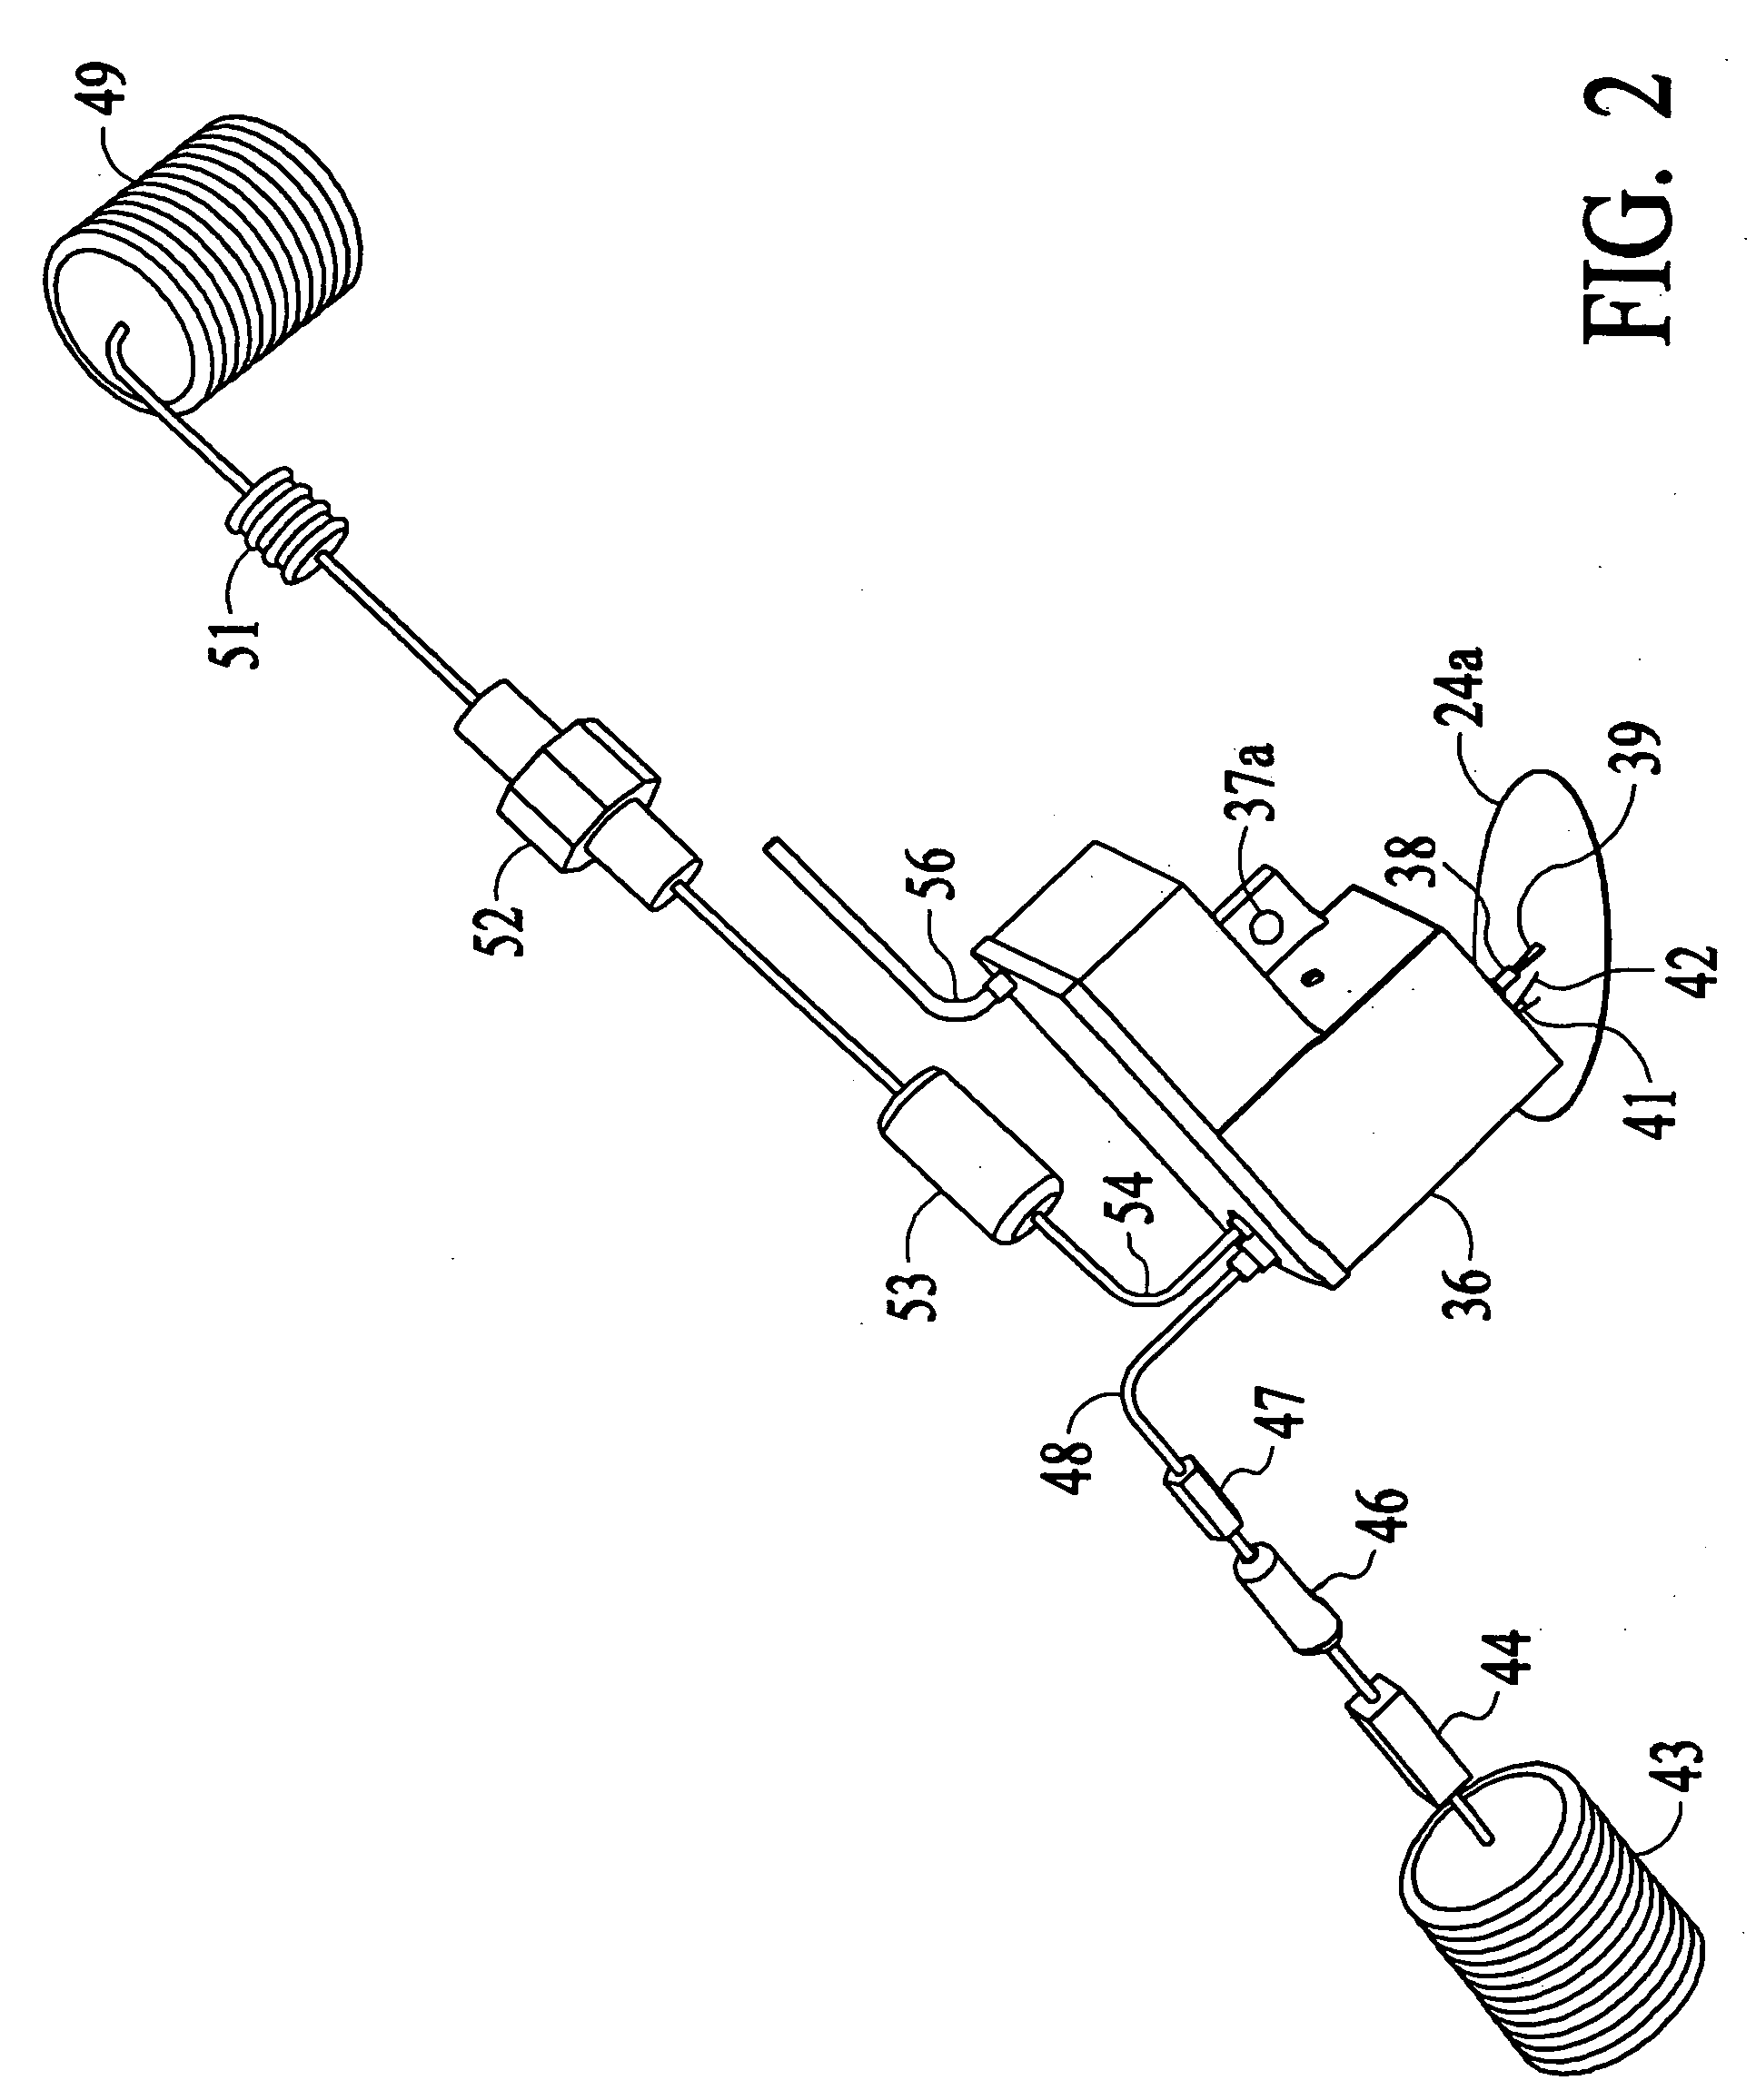 Methods for residue removal and corrosion prevention in a post-metal etch process